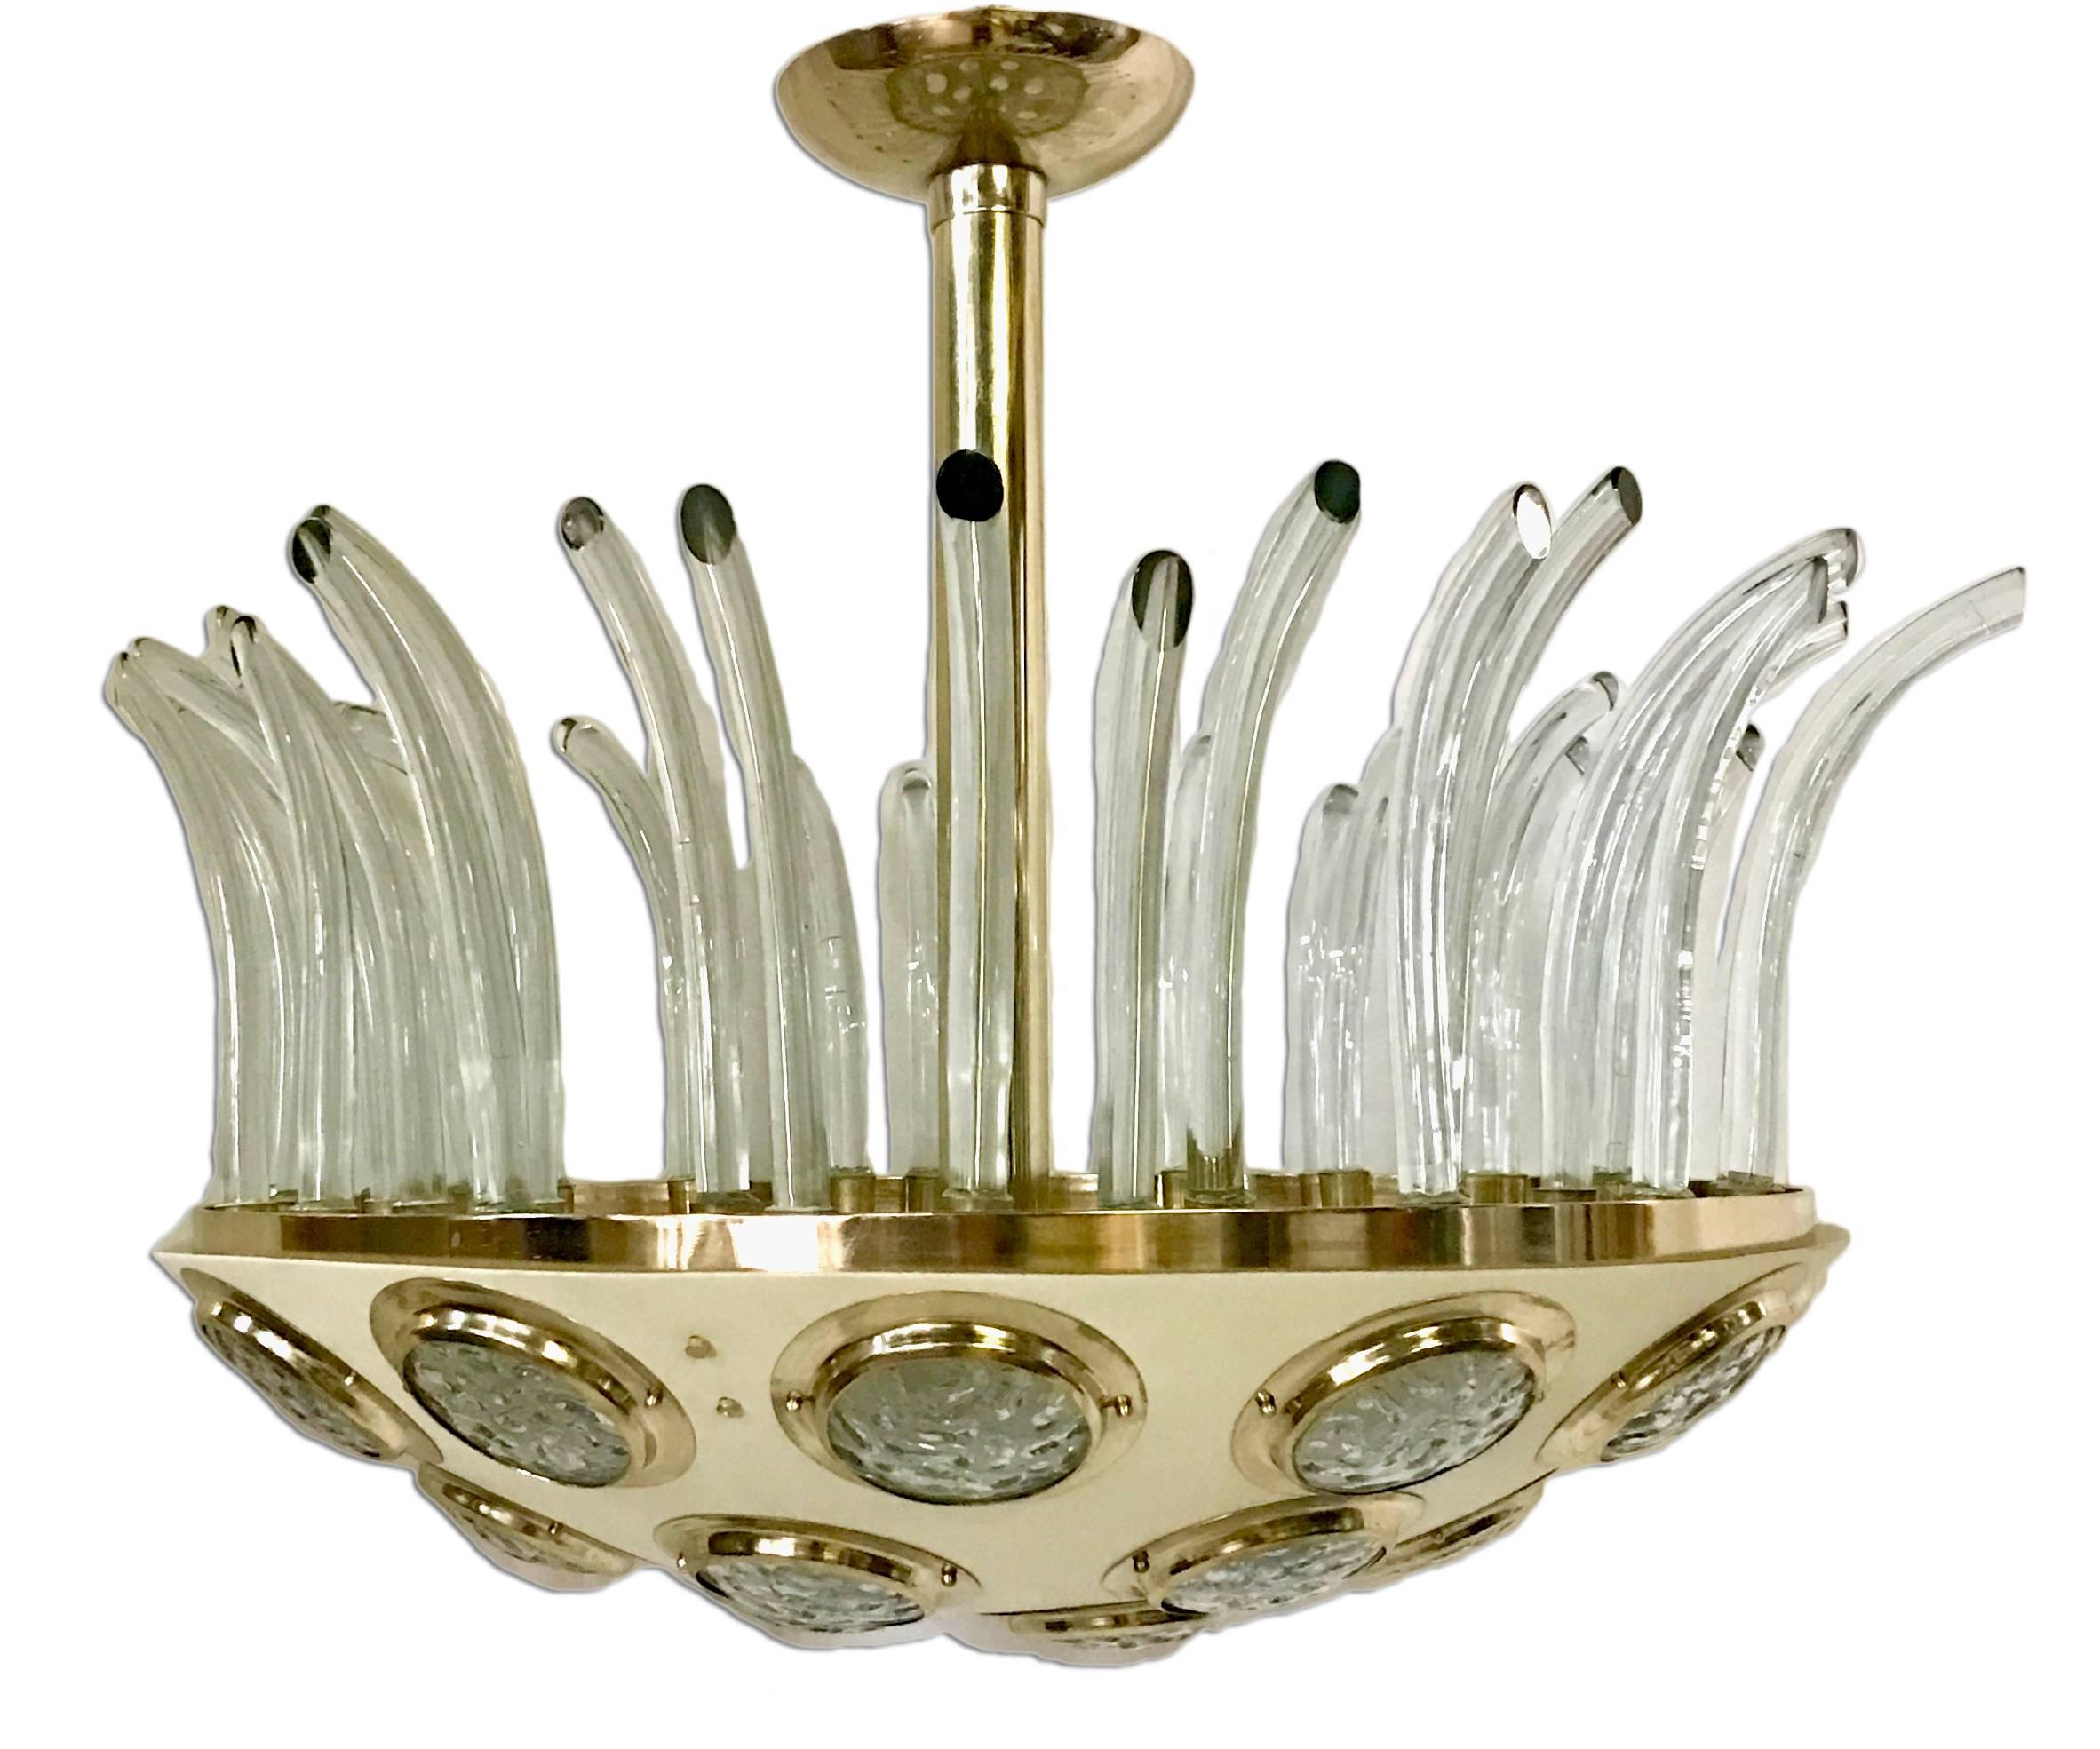 Circa 1960’s Italian Moderne light fixture, gilt with painted body. Glass insets on body and glass decorative elements.  6 interior  Edison lights.
Measurements:
Diameter: 33